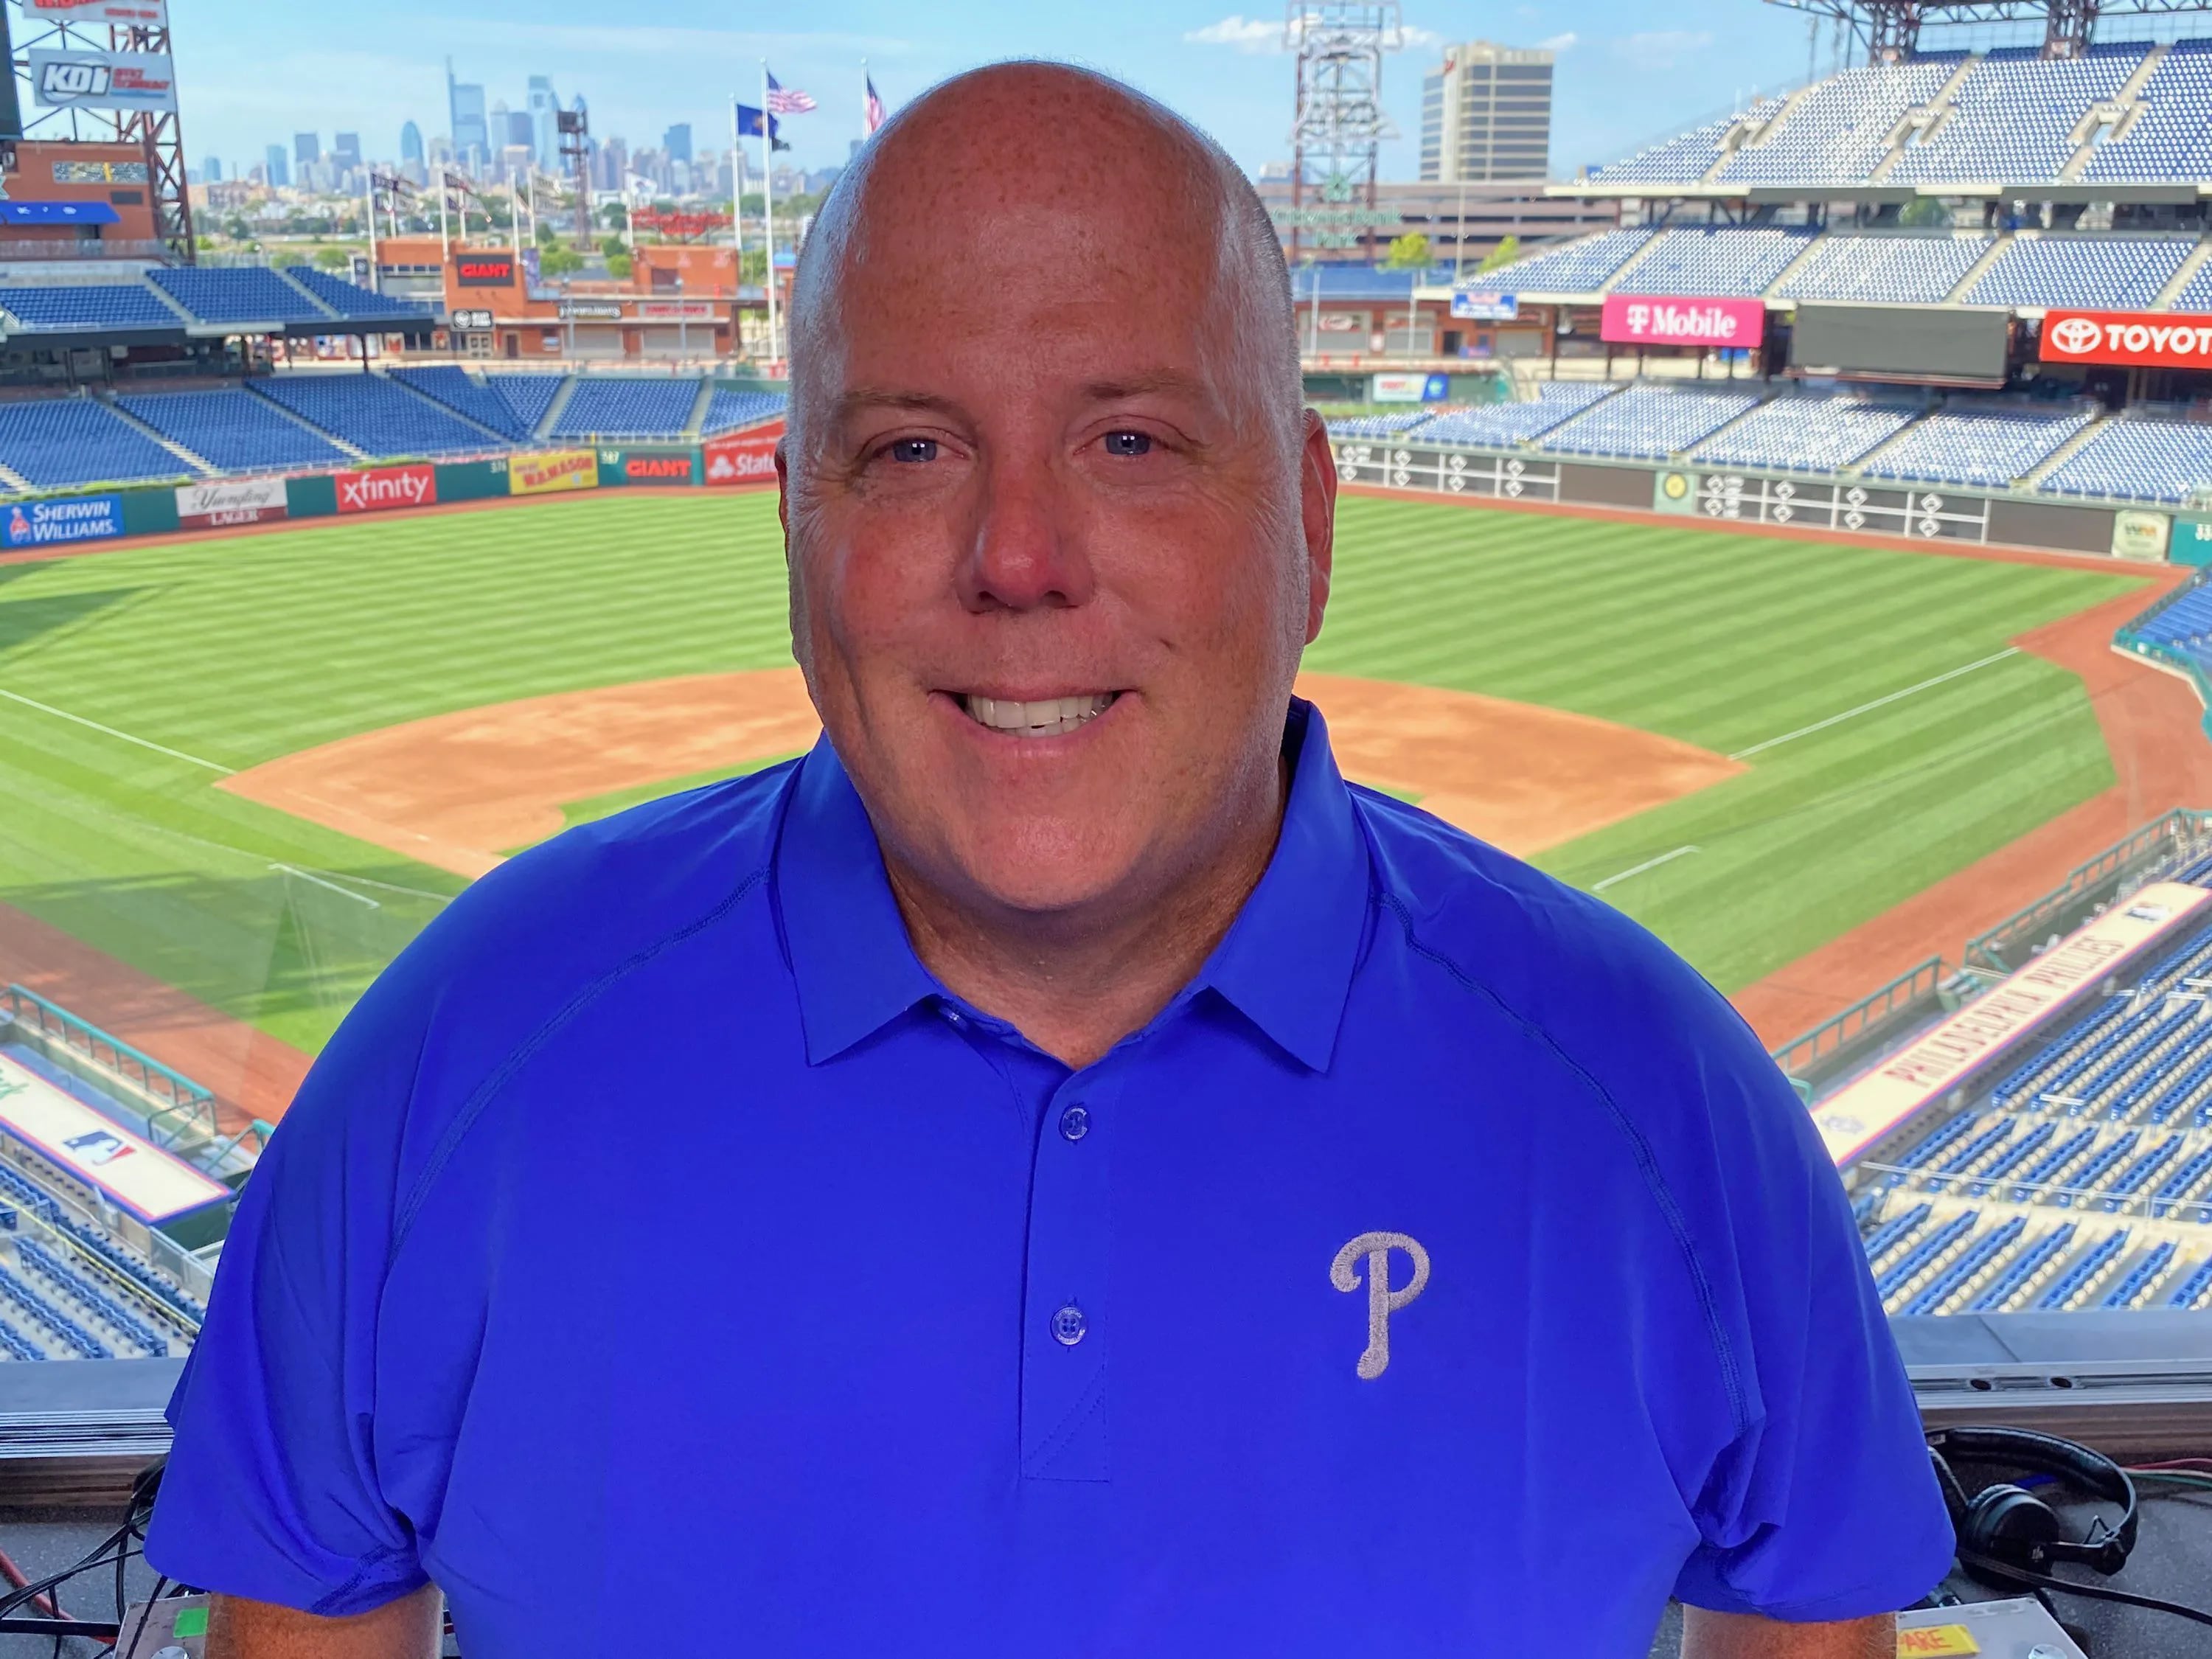 Philadelphia Phillies plan for traditional 2021 spring training schedule  with fans